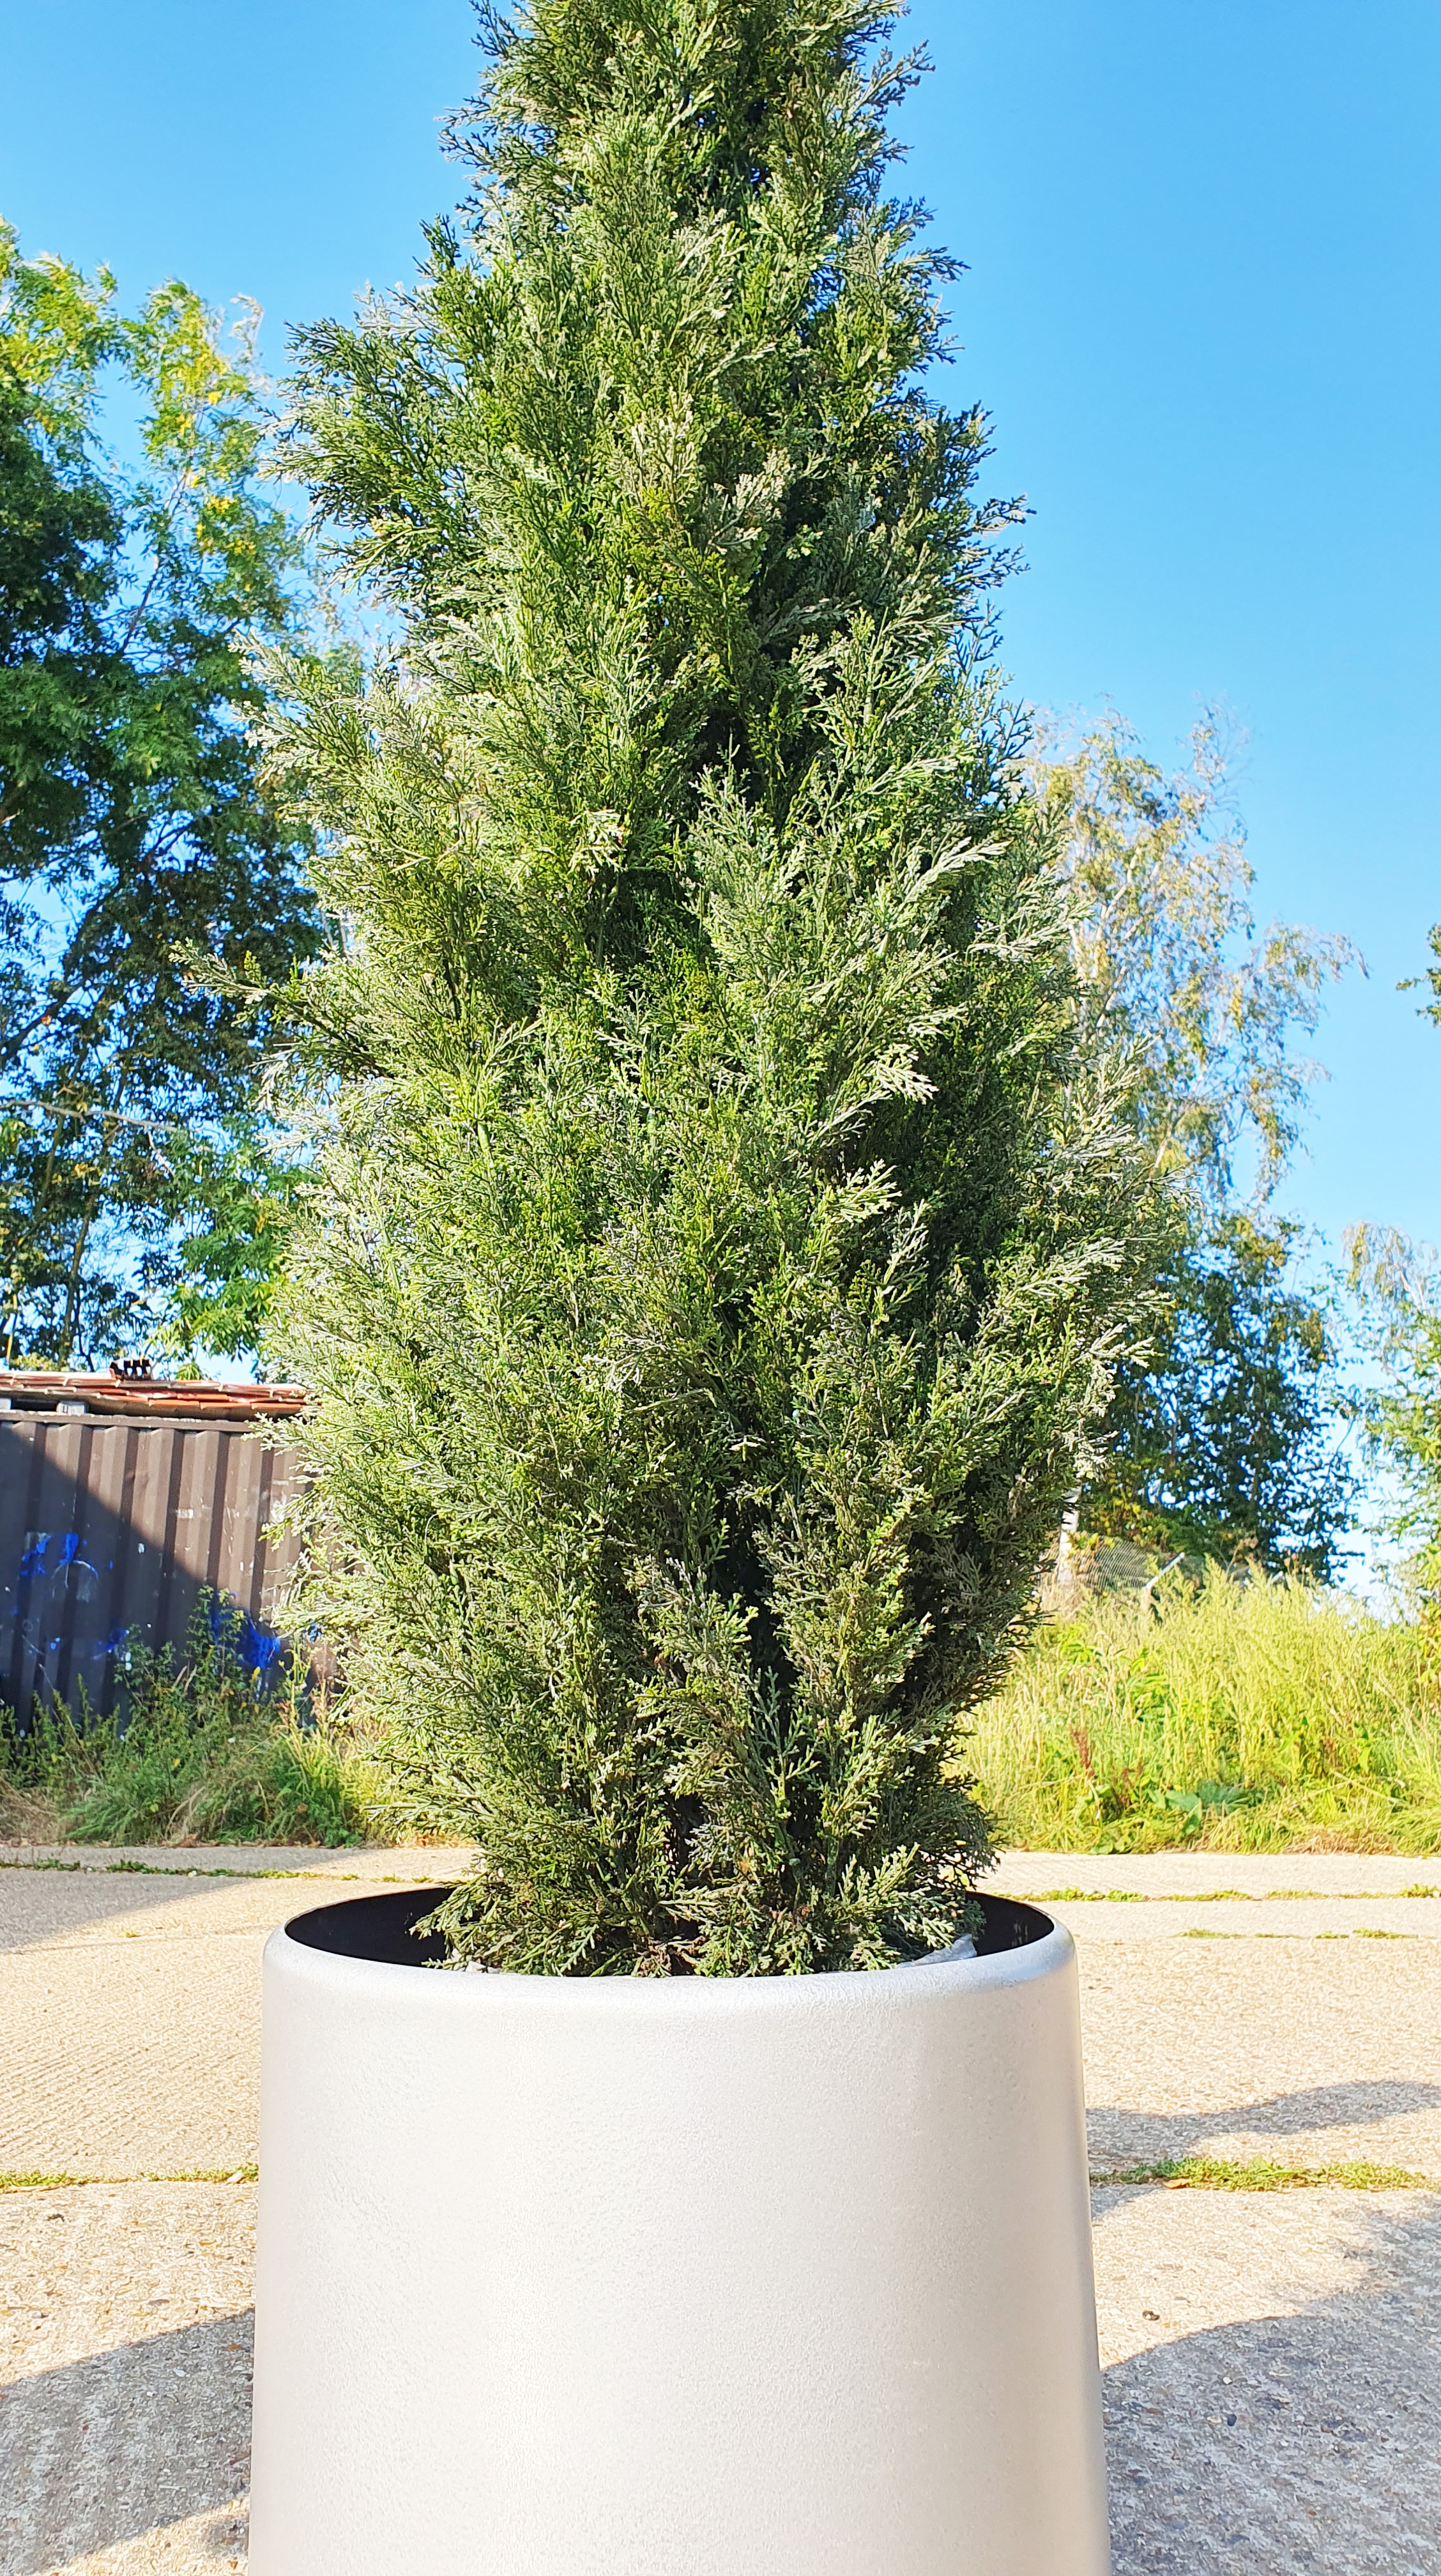 Large Industrial Metal Planter with Artificial Conifer tree. Approx 2.1m tall combined. Rrp £599 - Image 3 of 3